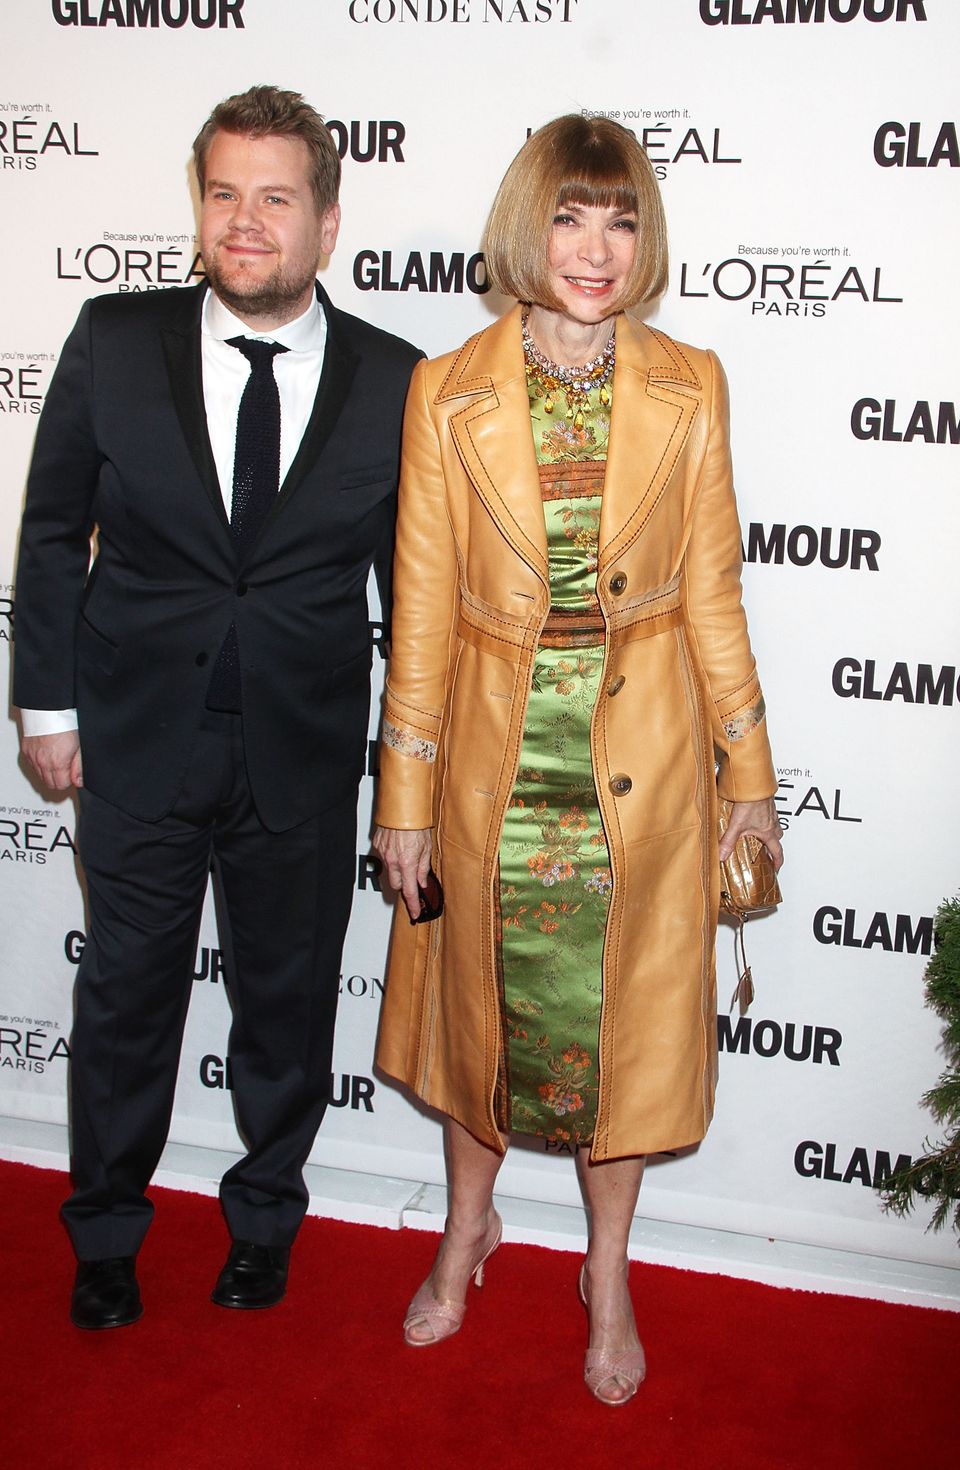 2014 Glamour Women Of The Year Awards